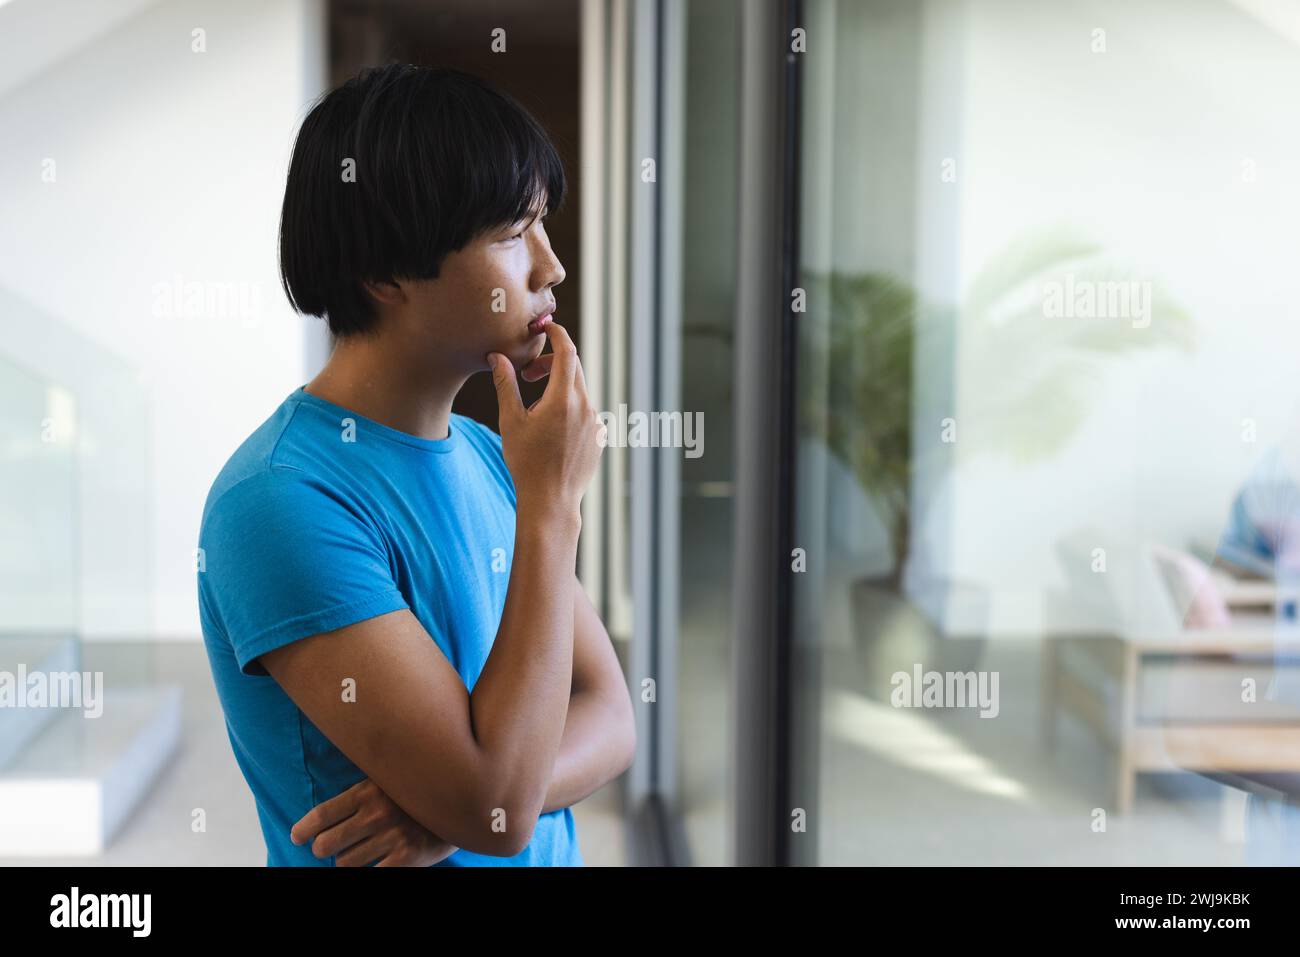 A sad teenage Asian boy looks thoughtful, with copy space Stock Photo